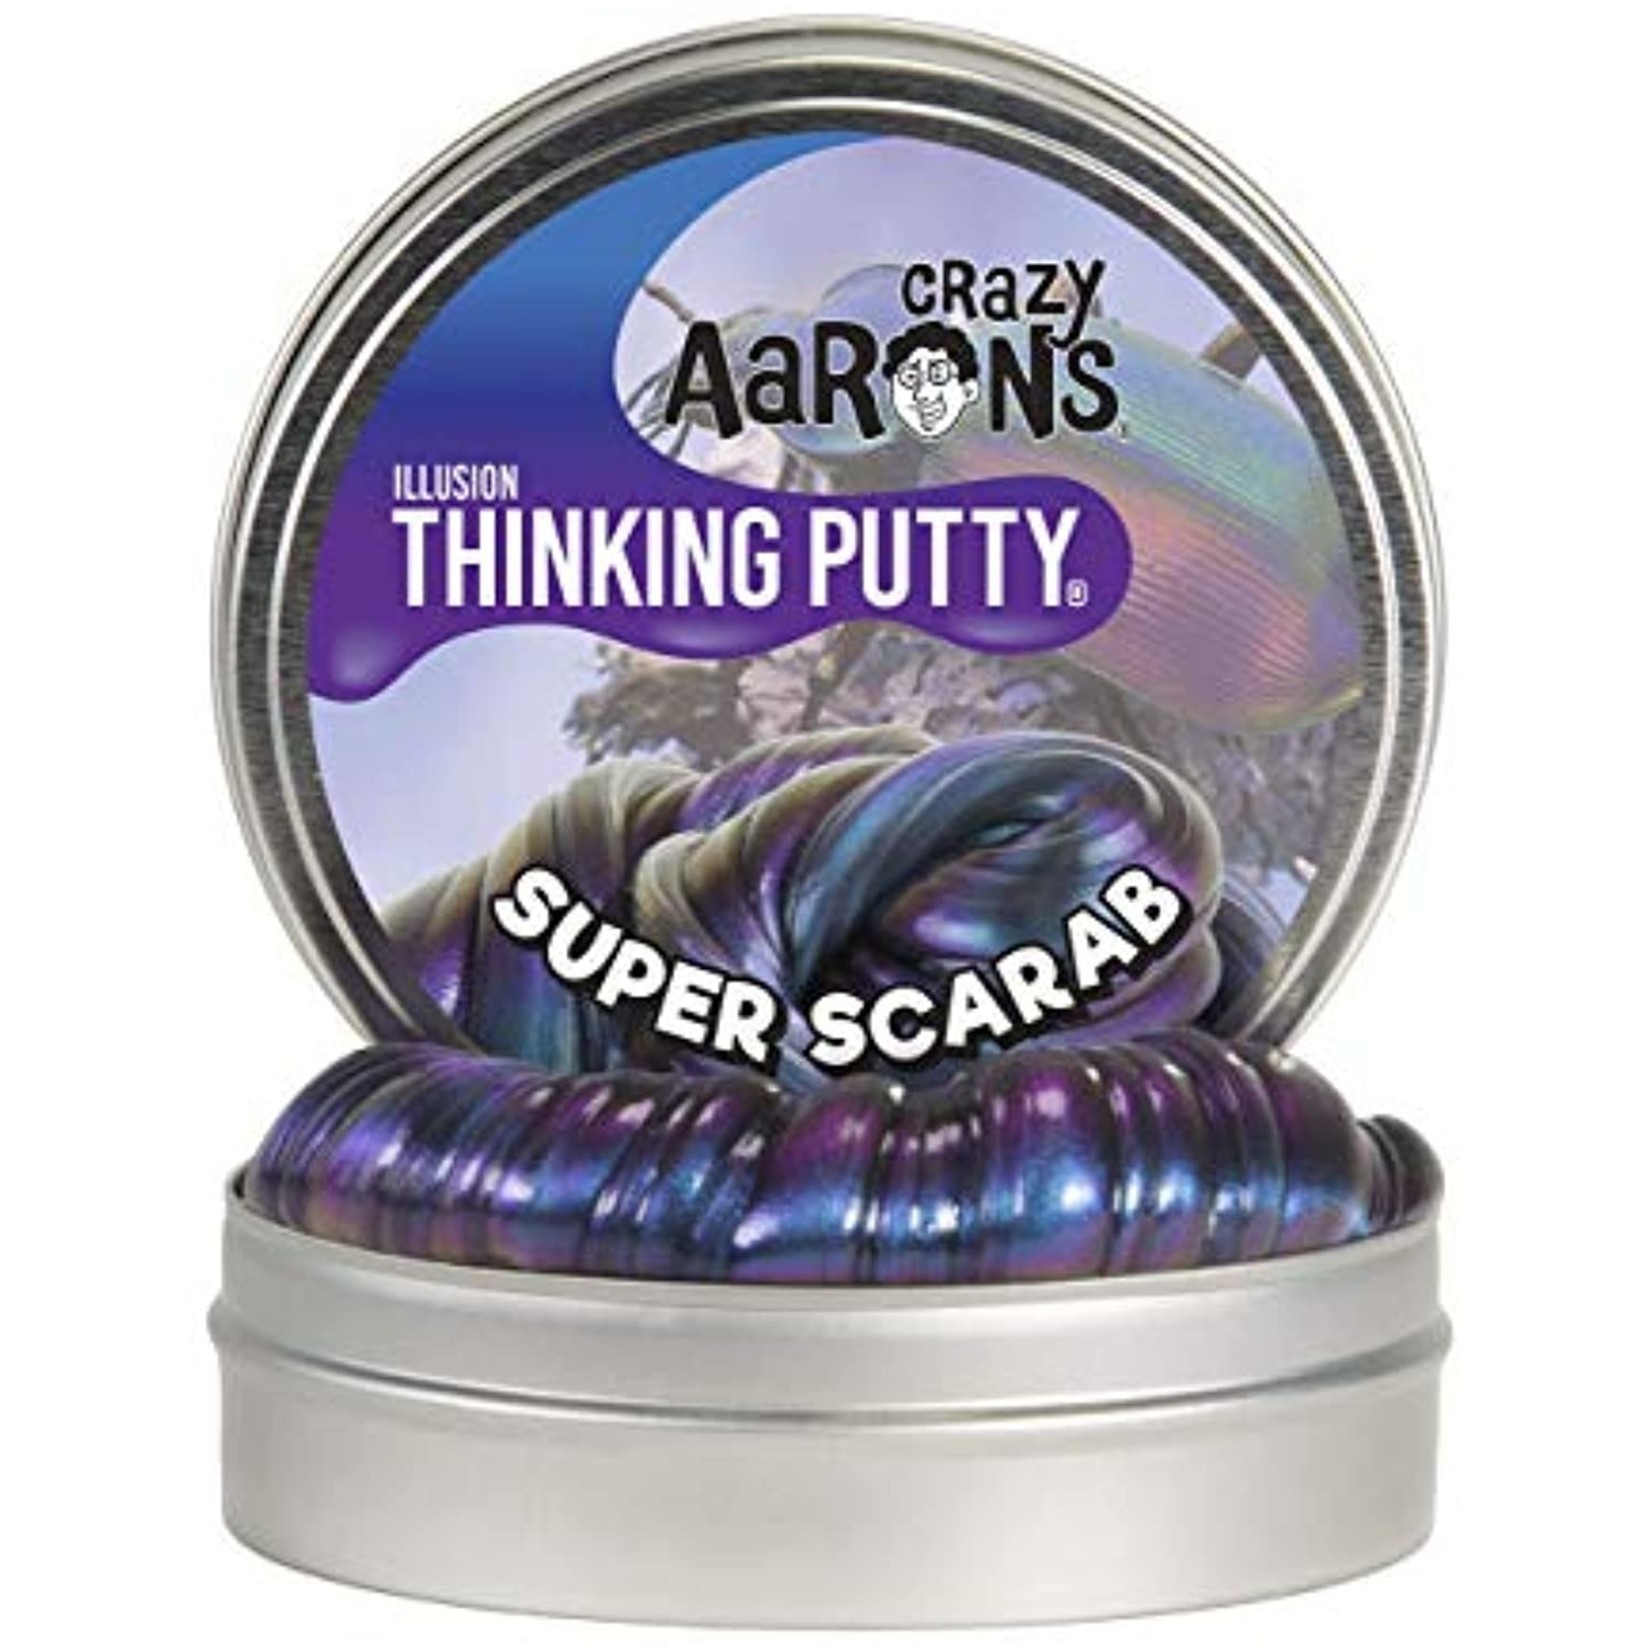 Crazy Aaron's Crazy Aaron's Super Scarab - Full Size 4" Thinking Putty Tin